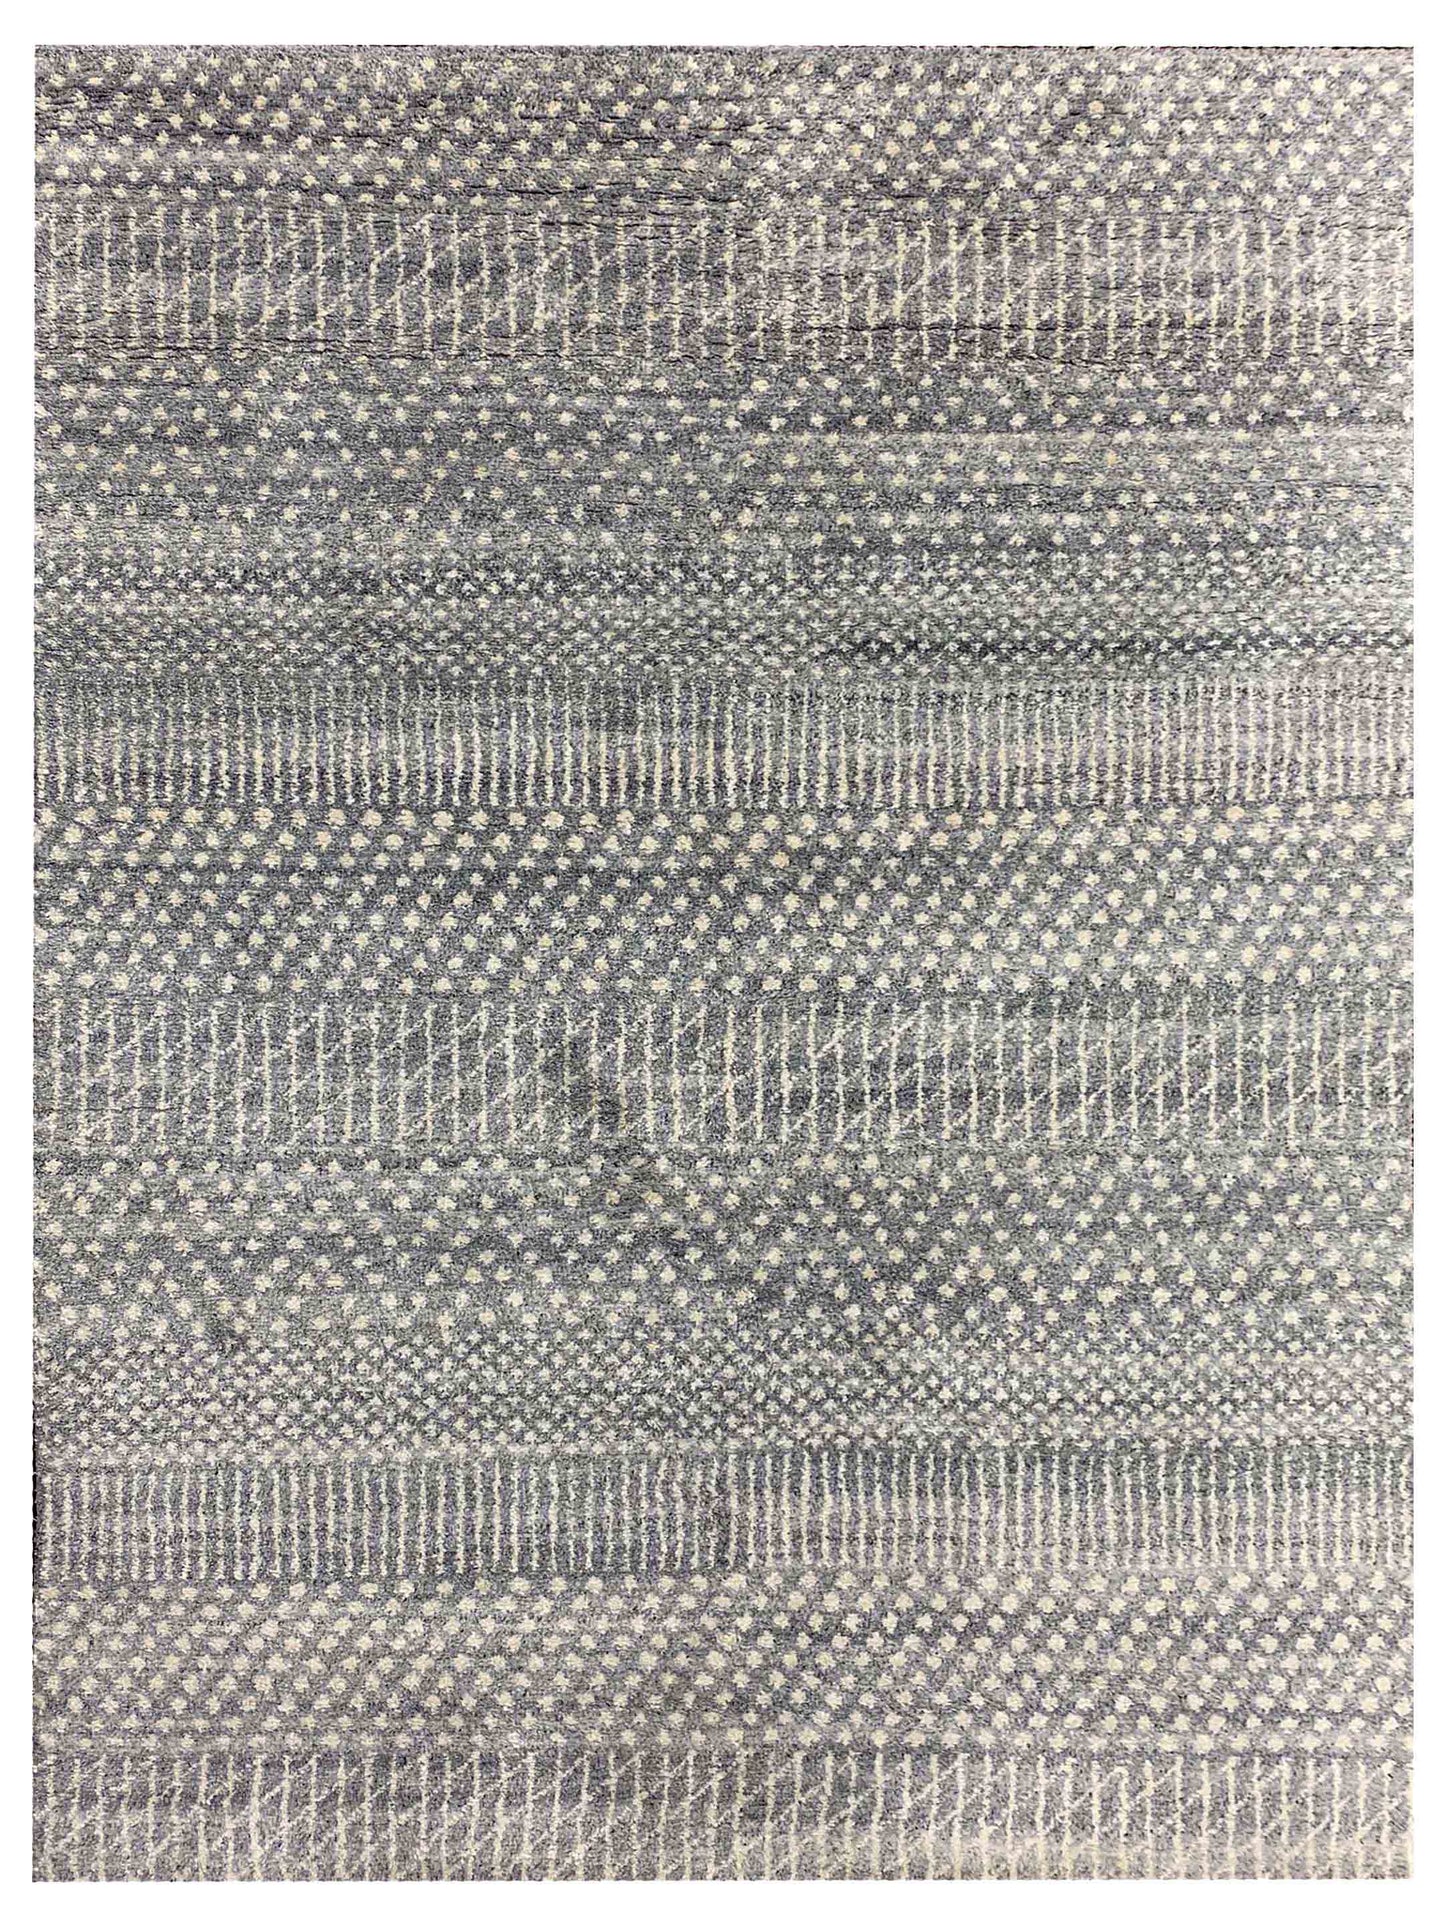 Artisan Marion MC-101 Grey Transitional Knotted Rug